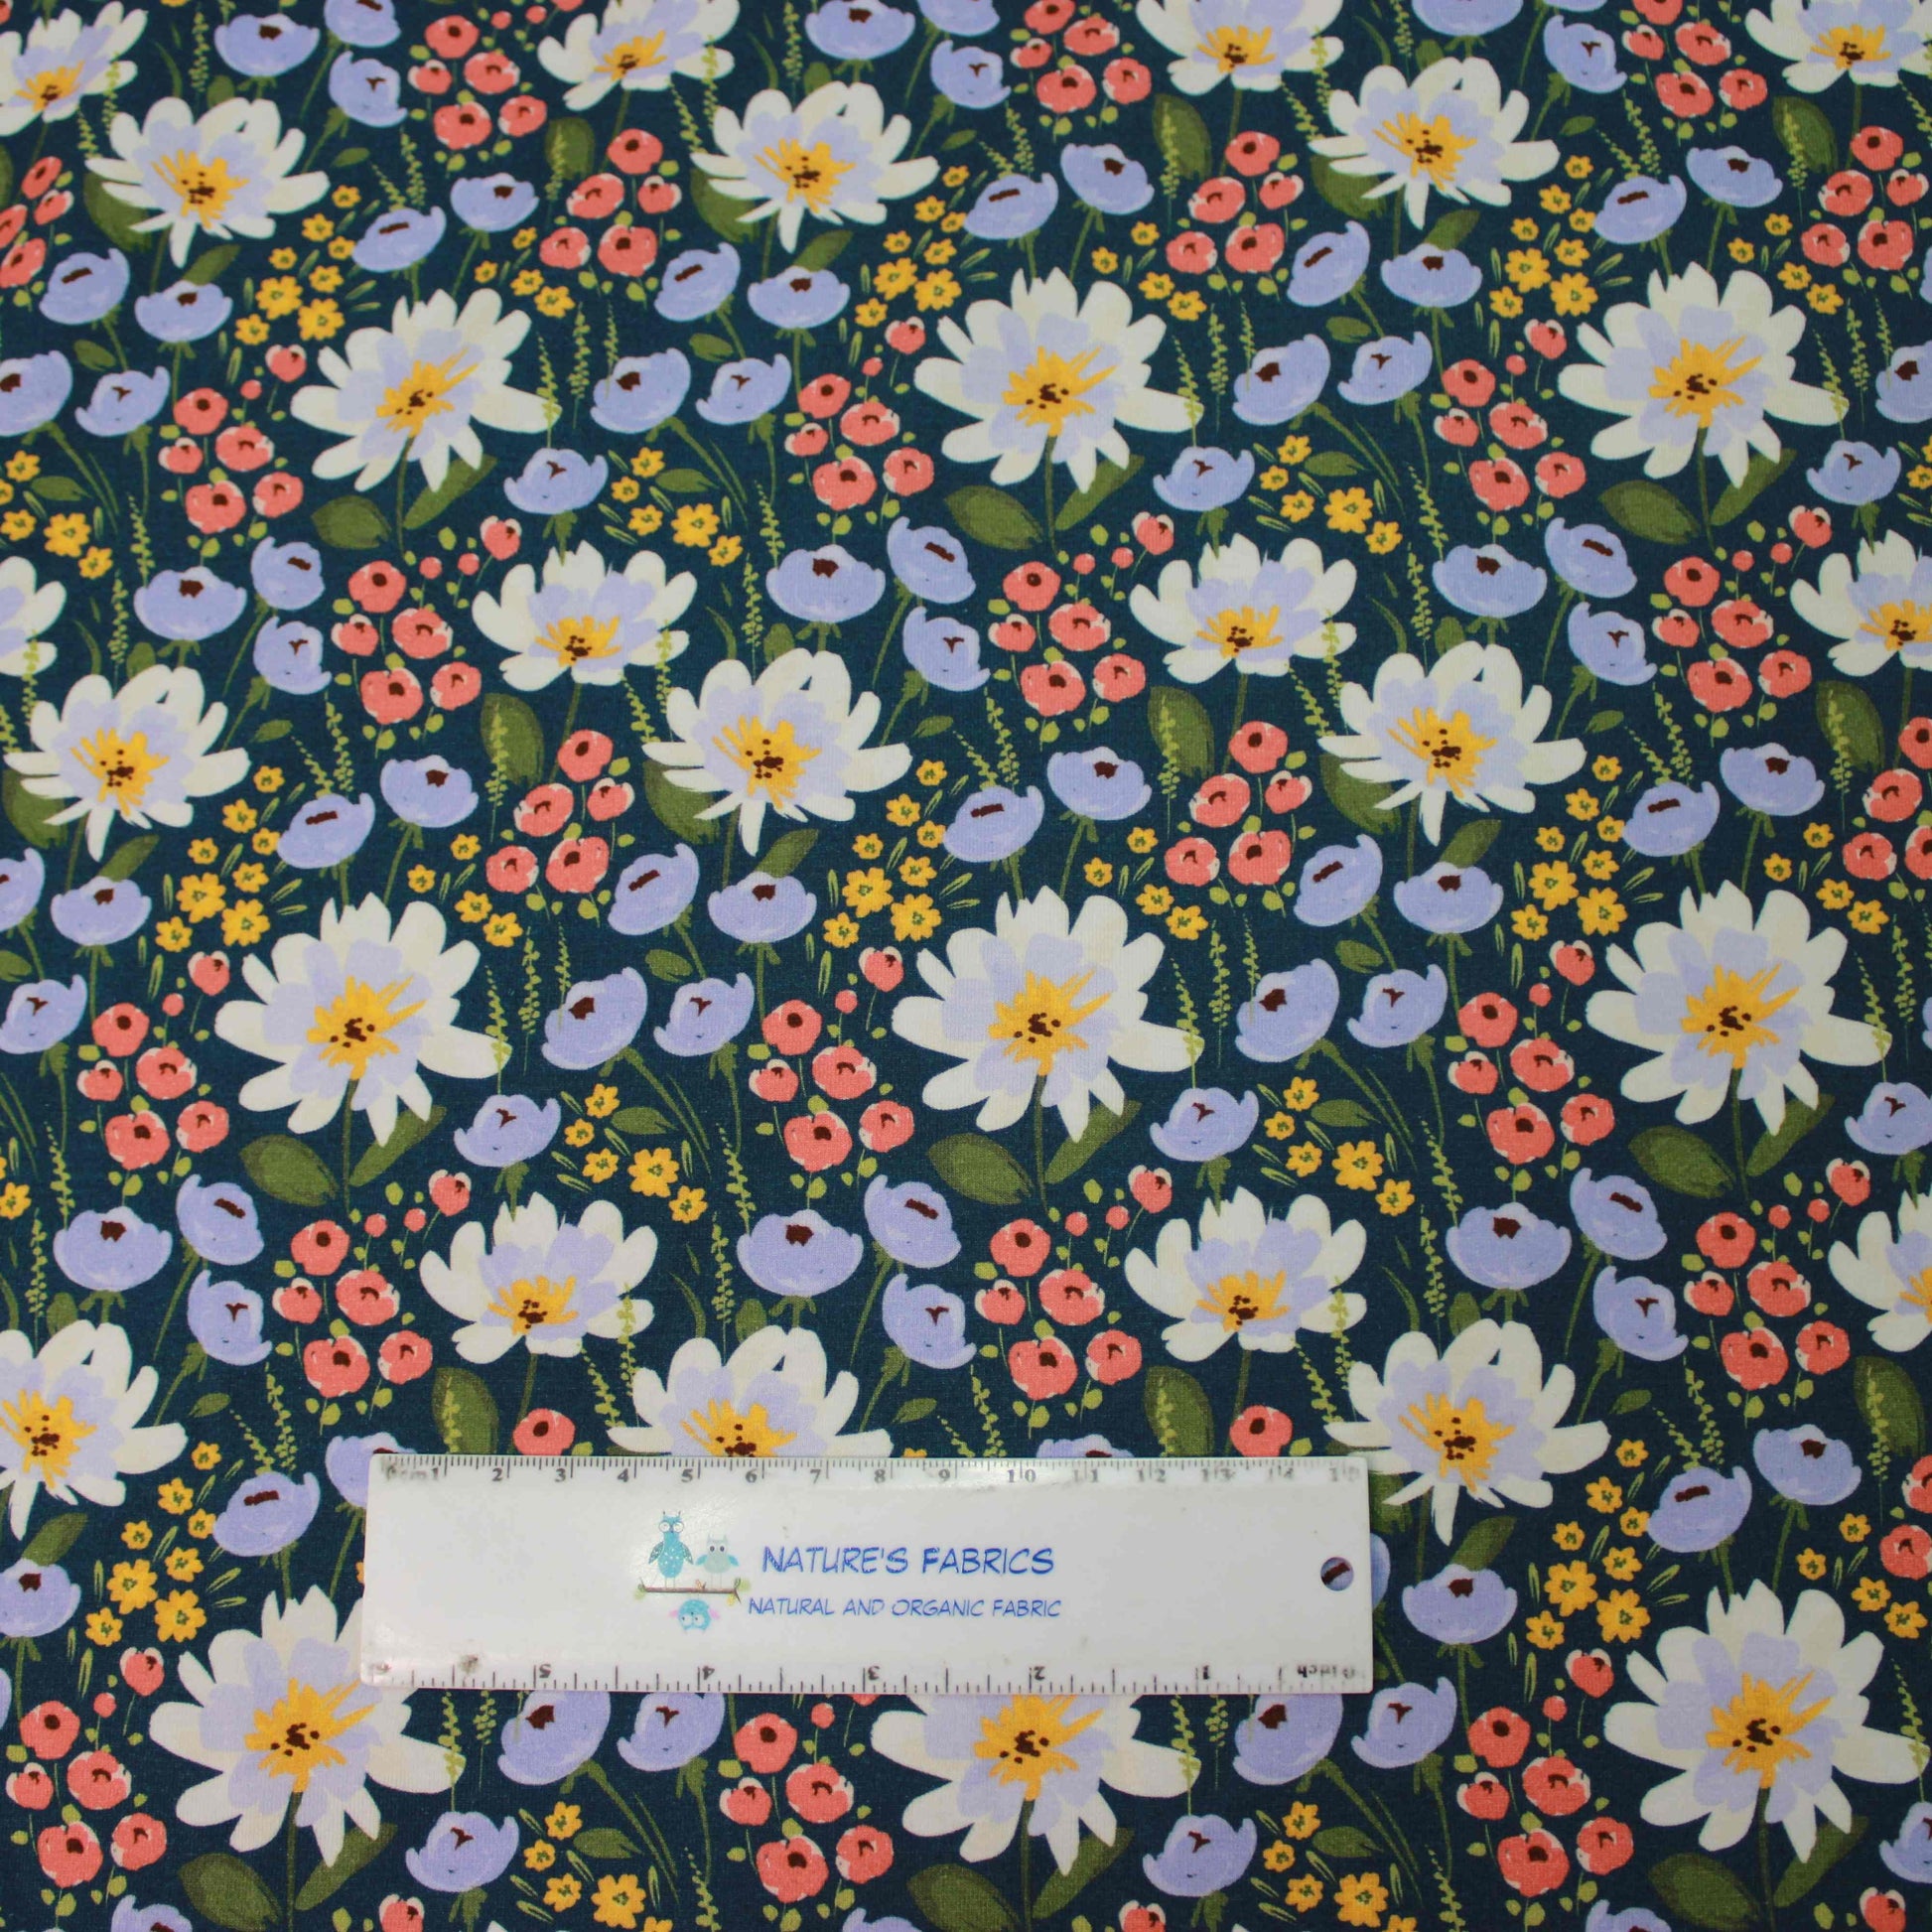 Walk in the Garden on Bamboo/Spandex Jersey Fabric - Nature's Fabrics